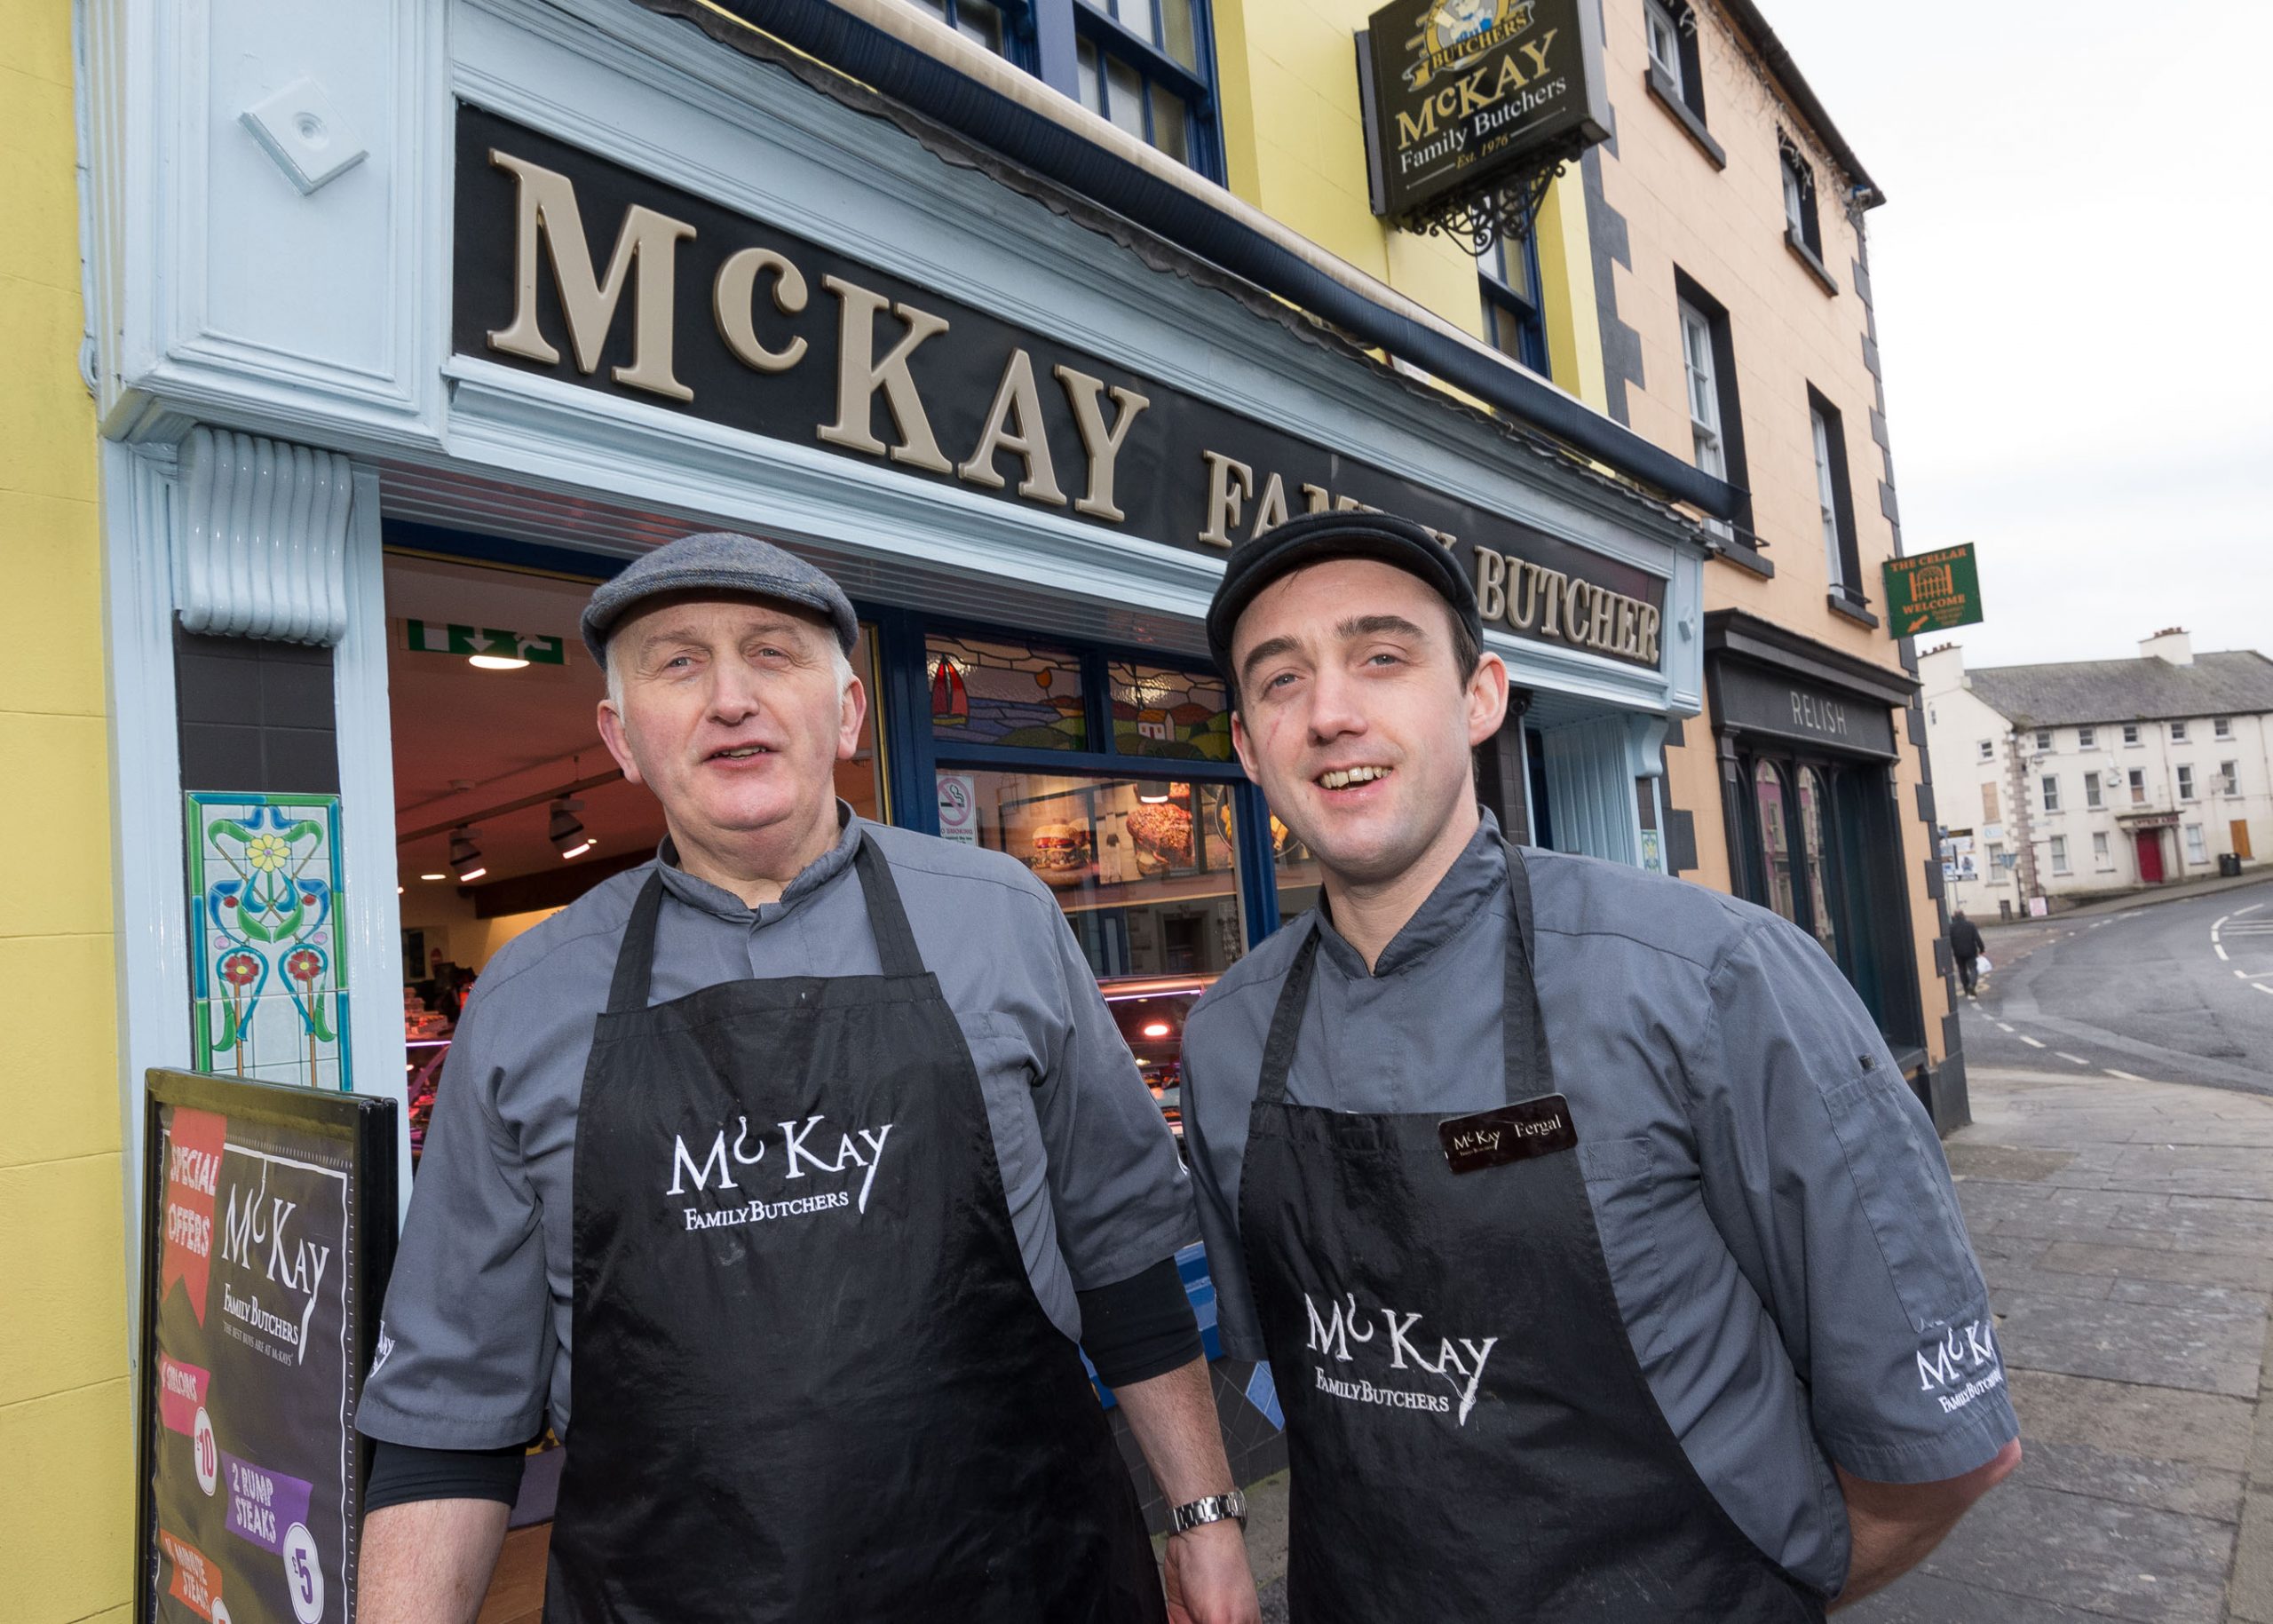 The personal touch wows customers at McKay Family Butchers